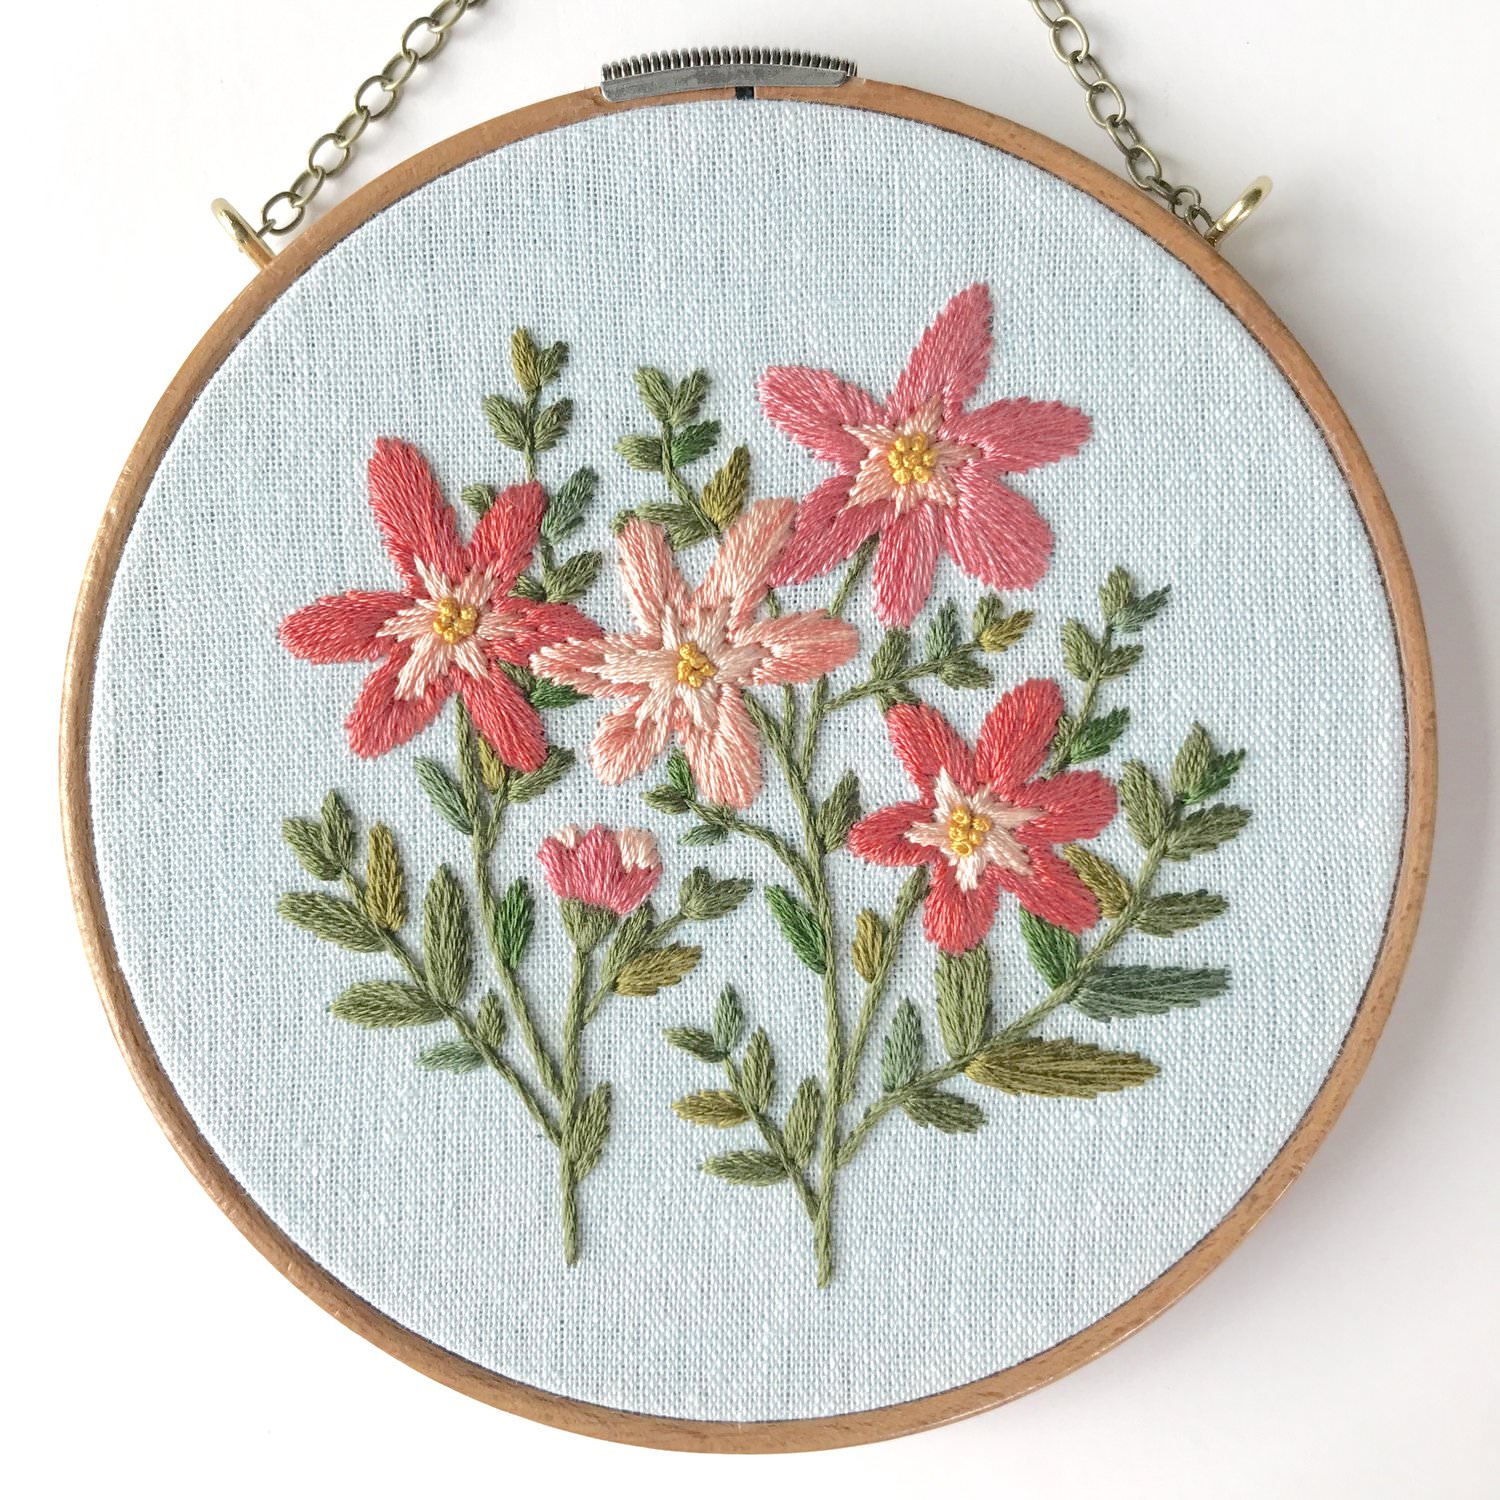 The Gorgeous Designs of Lark Rising Embroidery – She's So Bright